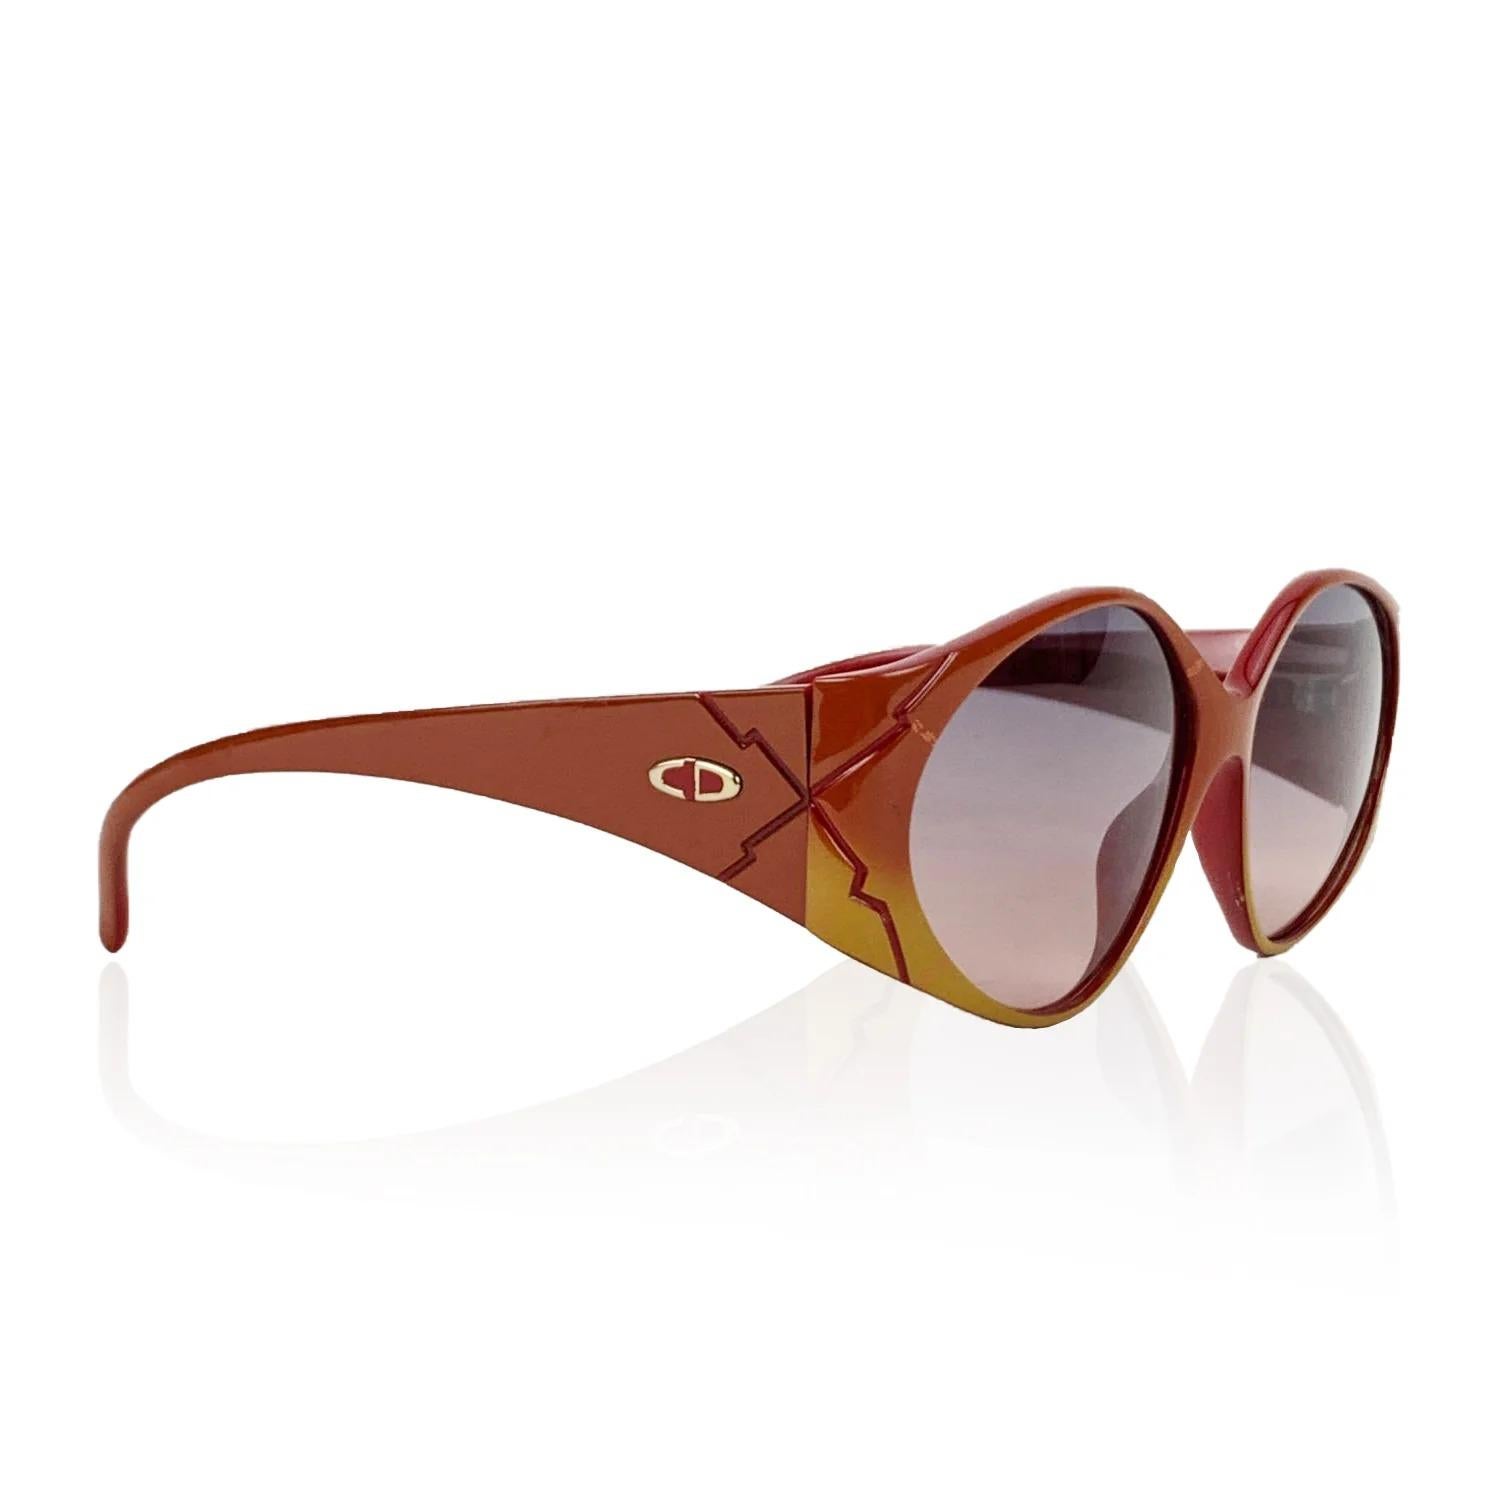 Vintage sunglasses by CHRISTIAN DIOR, mod. 2348 - 10. Bicolor red and brown OPTYL frame. CD logo on temple. Gradient brown 100% UV protection lenses. Made in Germany. Details MATERIAL: Acetate COLOR: Red MODEL: 2348 GENDER: Women COUNTRY OF